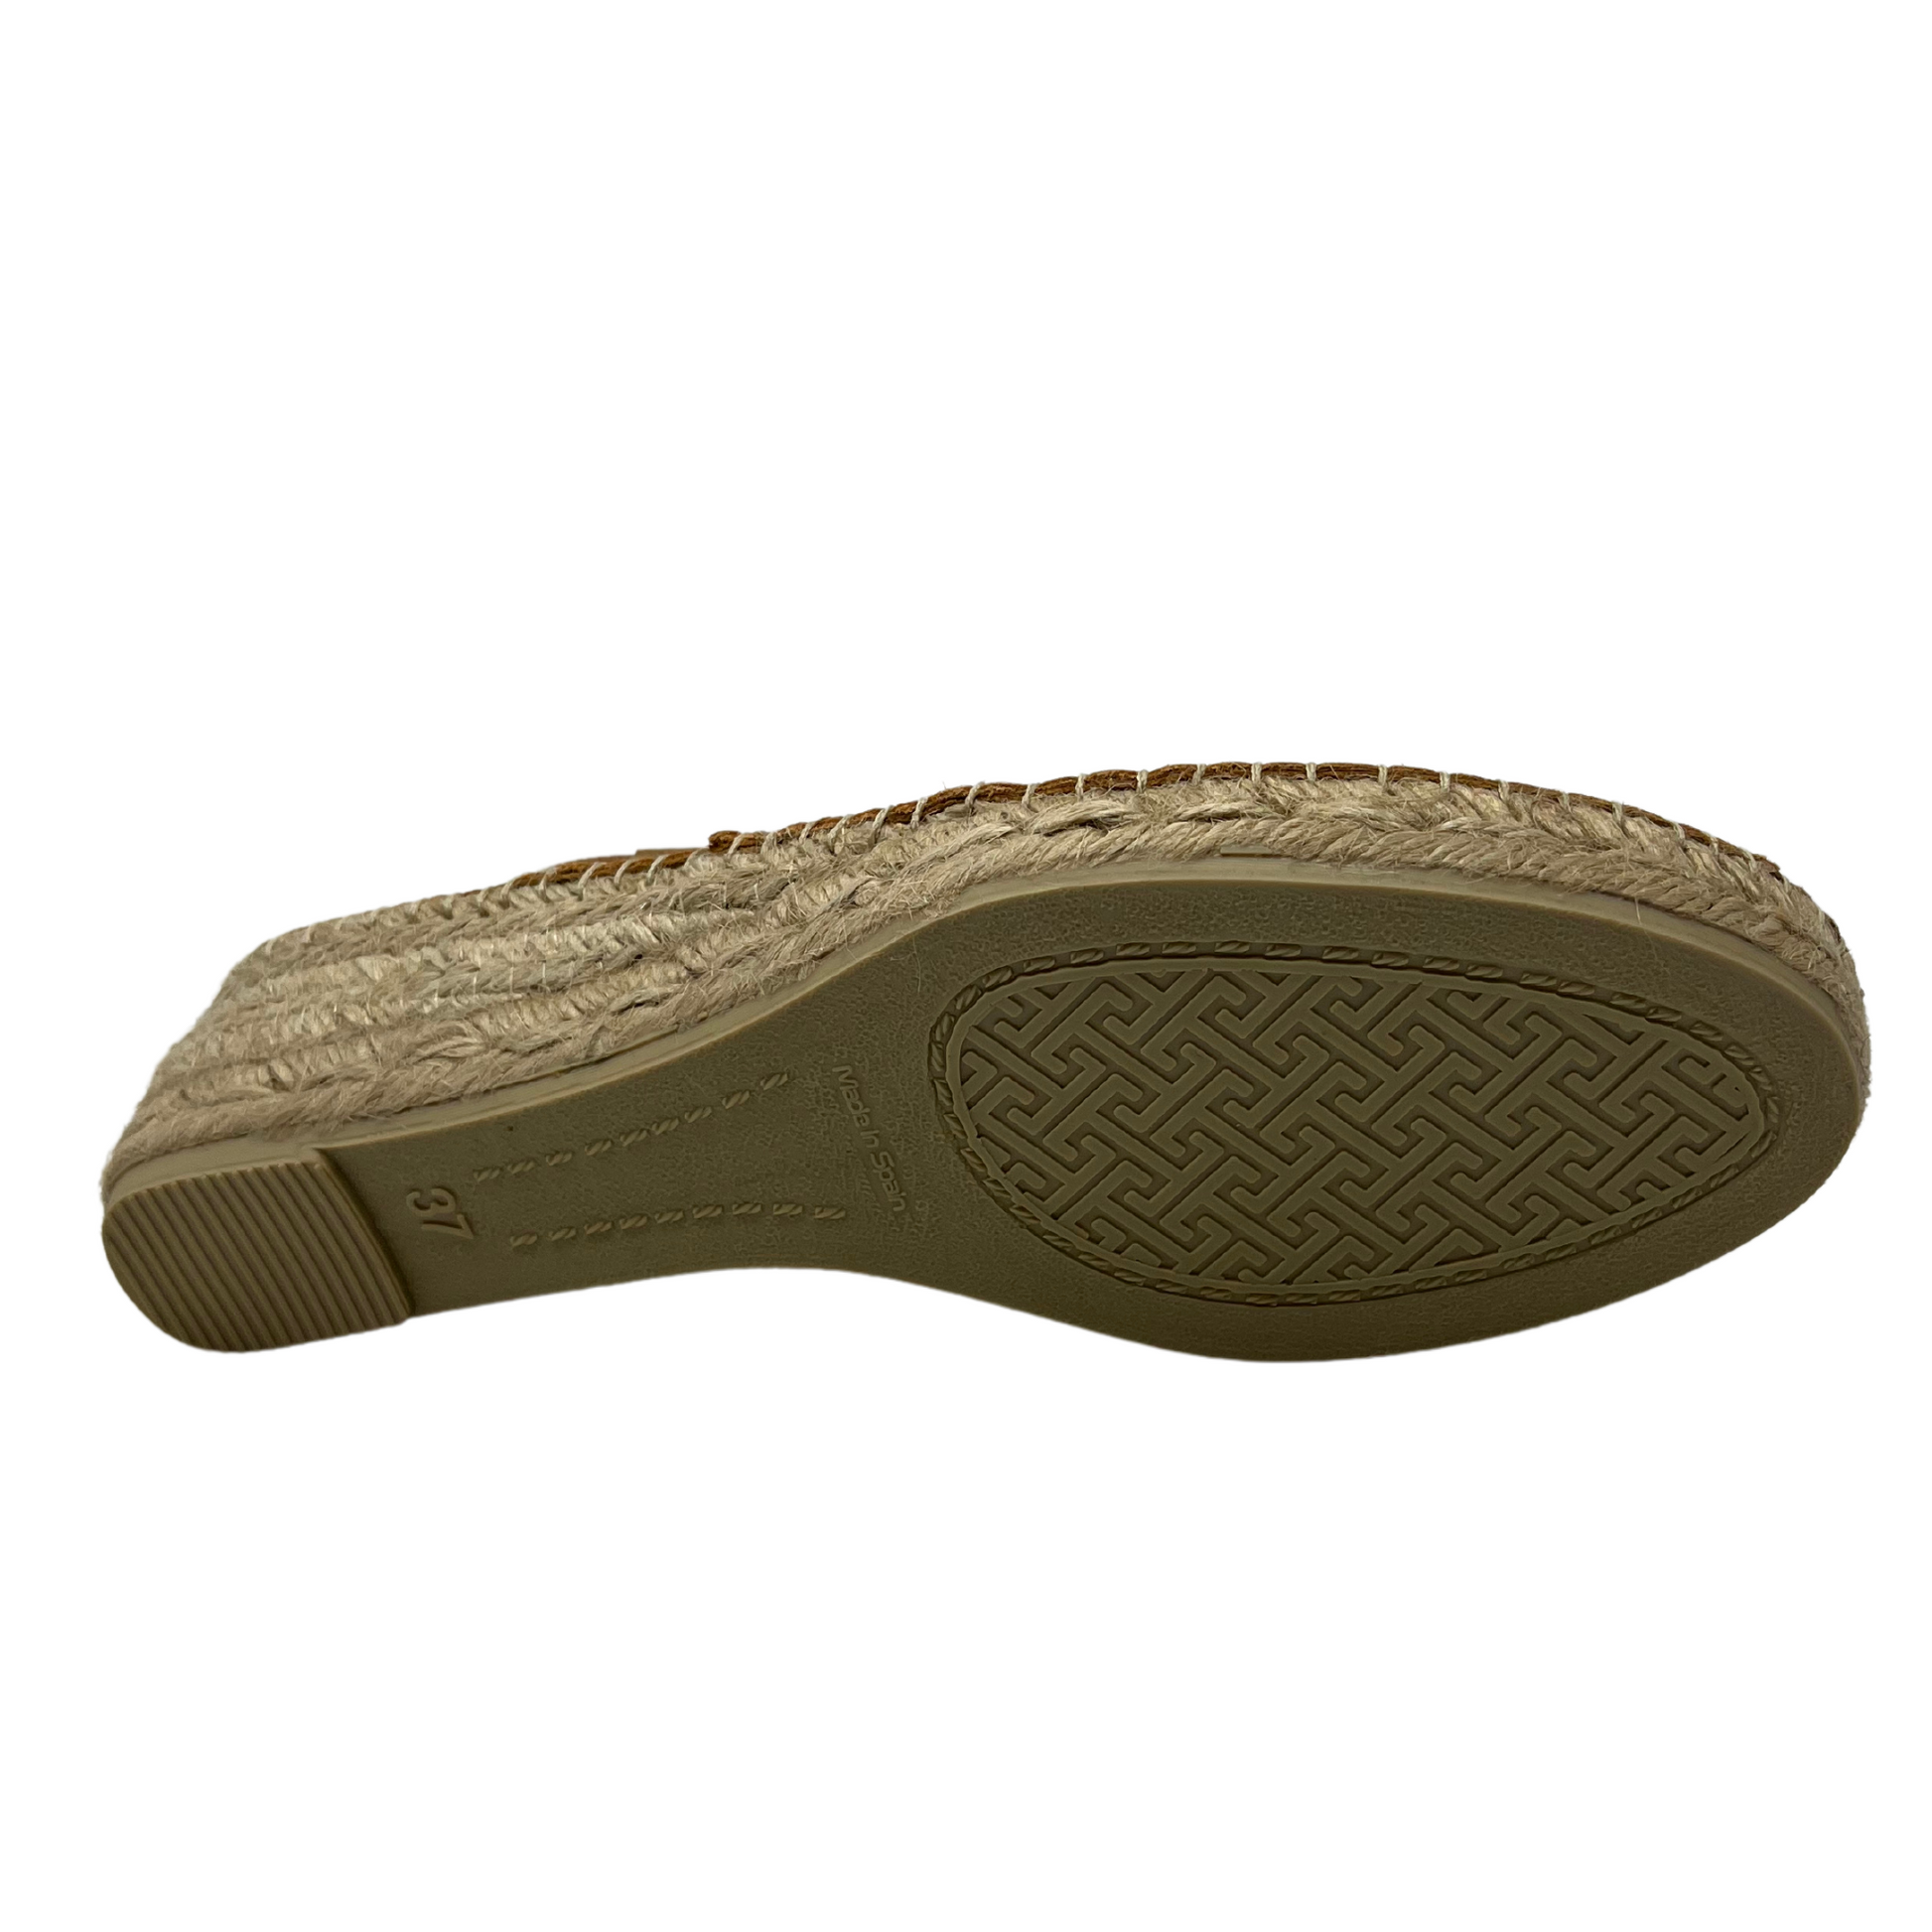 Bottom view of leather espadrille sandal with low wedge heel